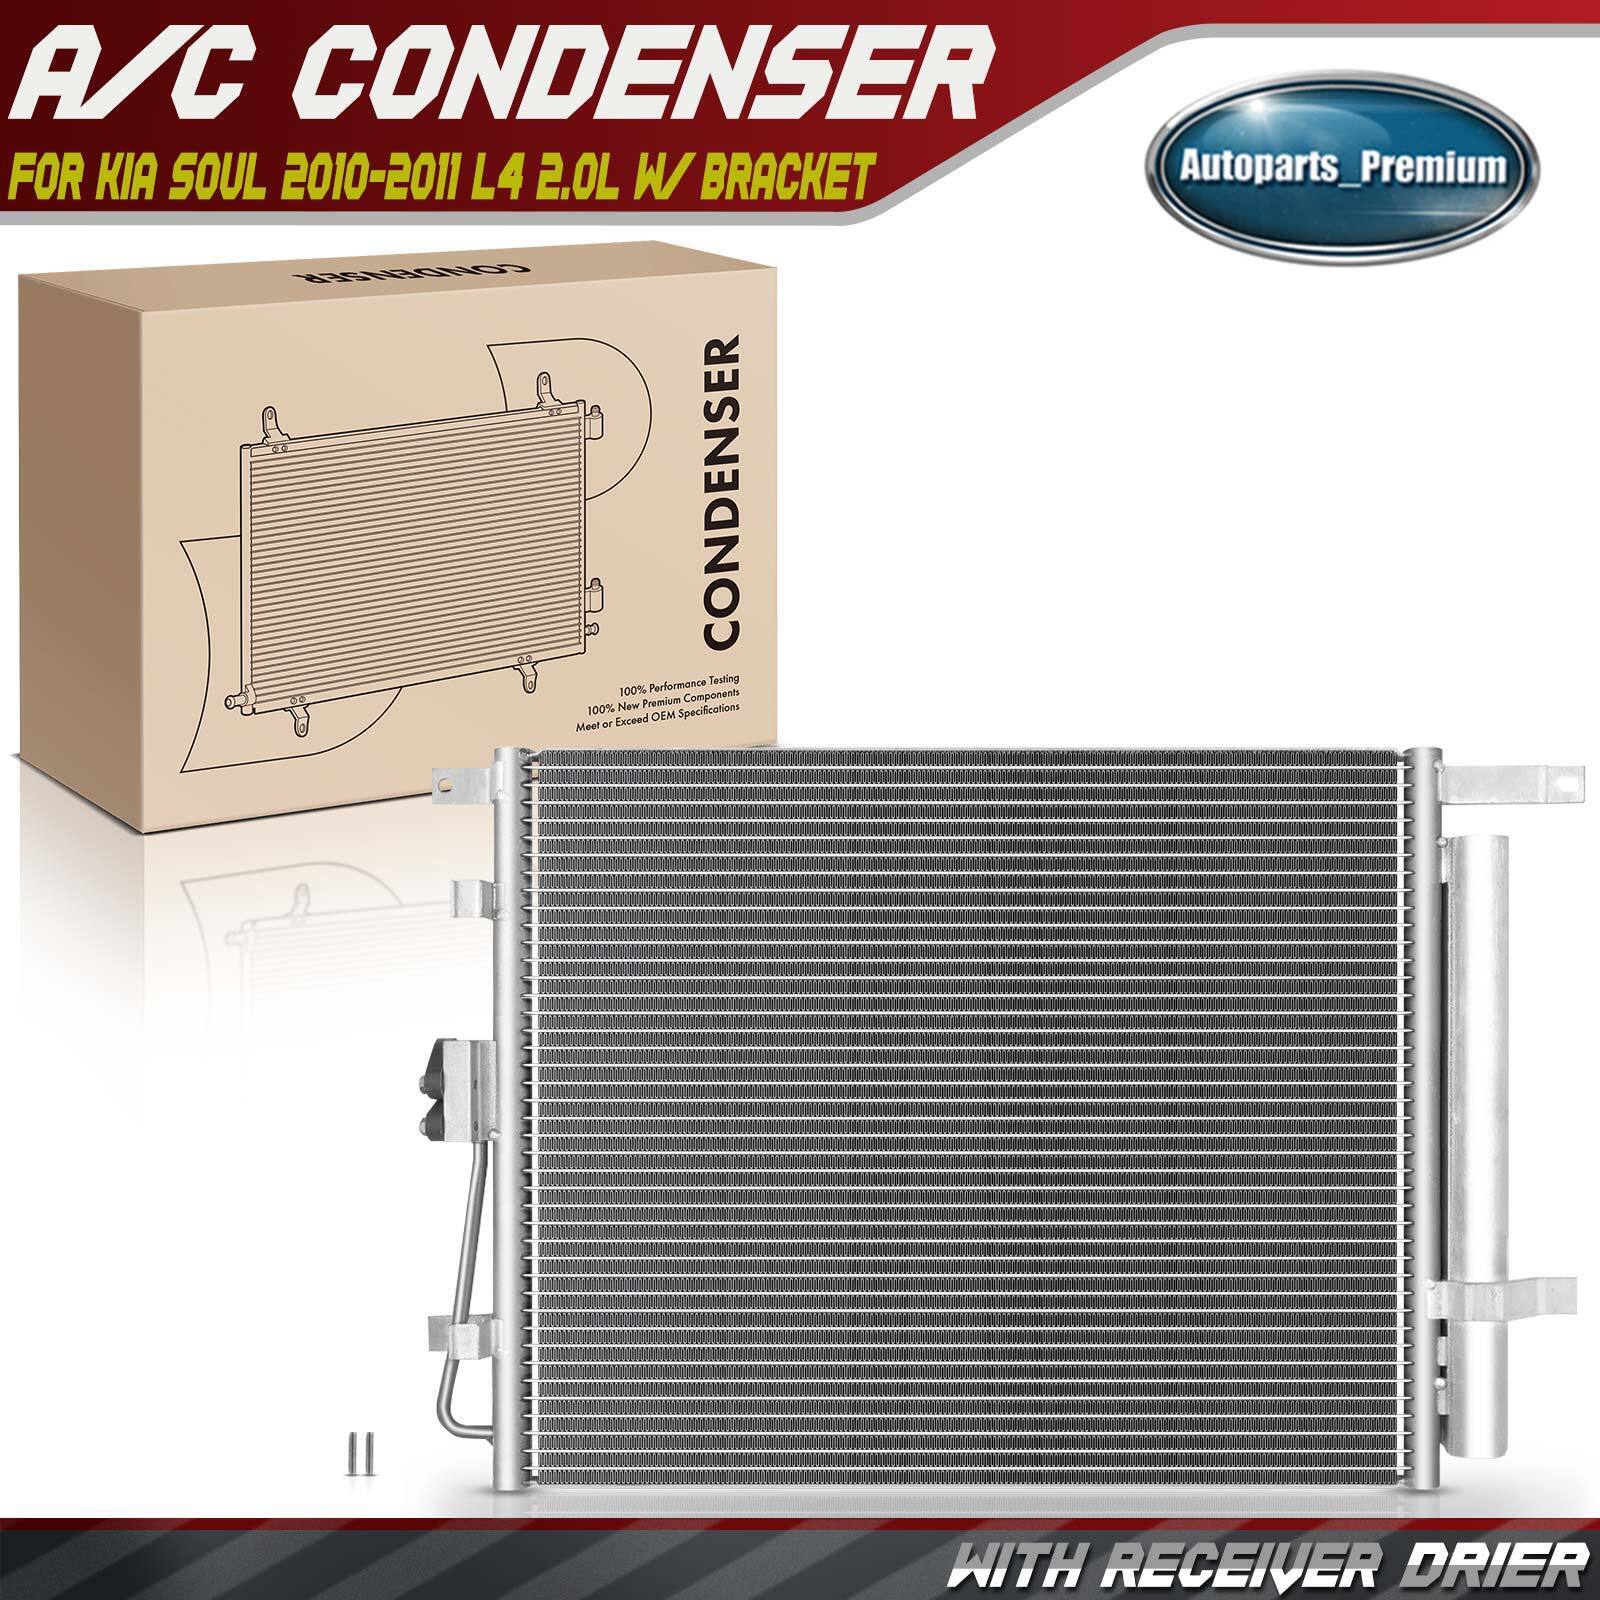 AC Condenser Air Conditioning with Receiver Drier for Kia Soul 2010-2011 L4 2.0L